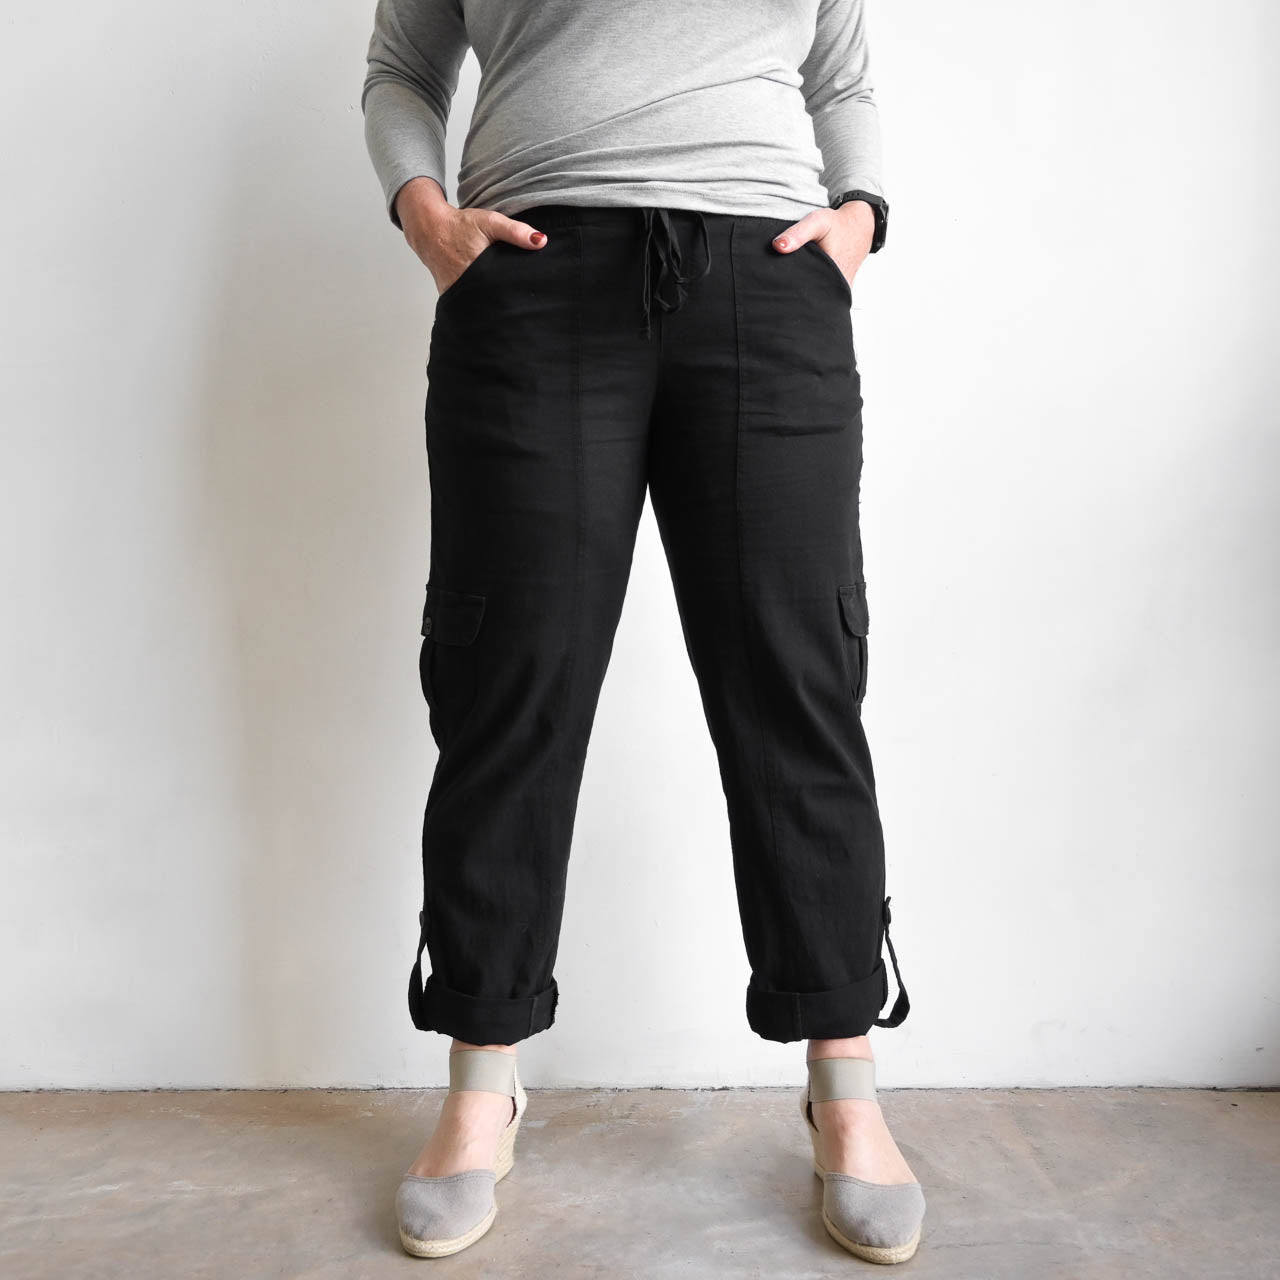 Classic Cargo Pant, the stretch utility-style pull-on casual trouser ...